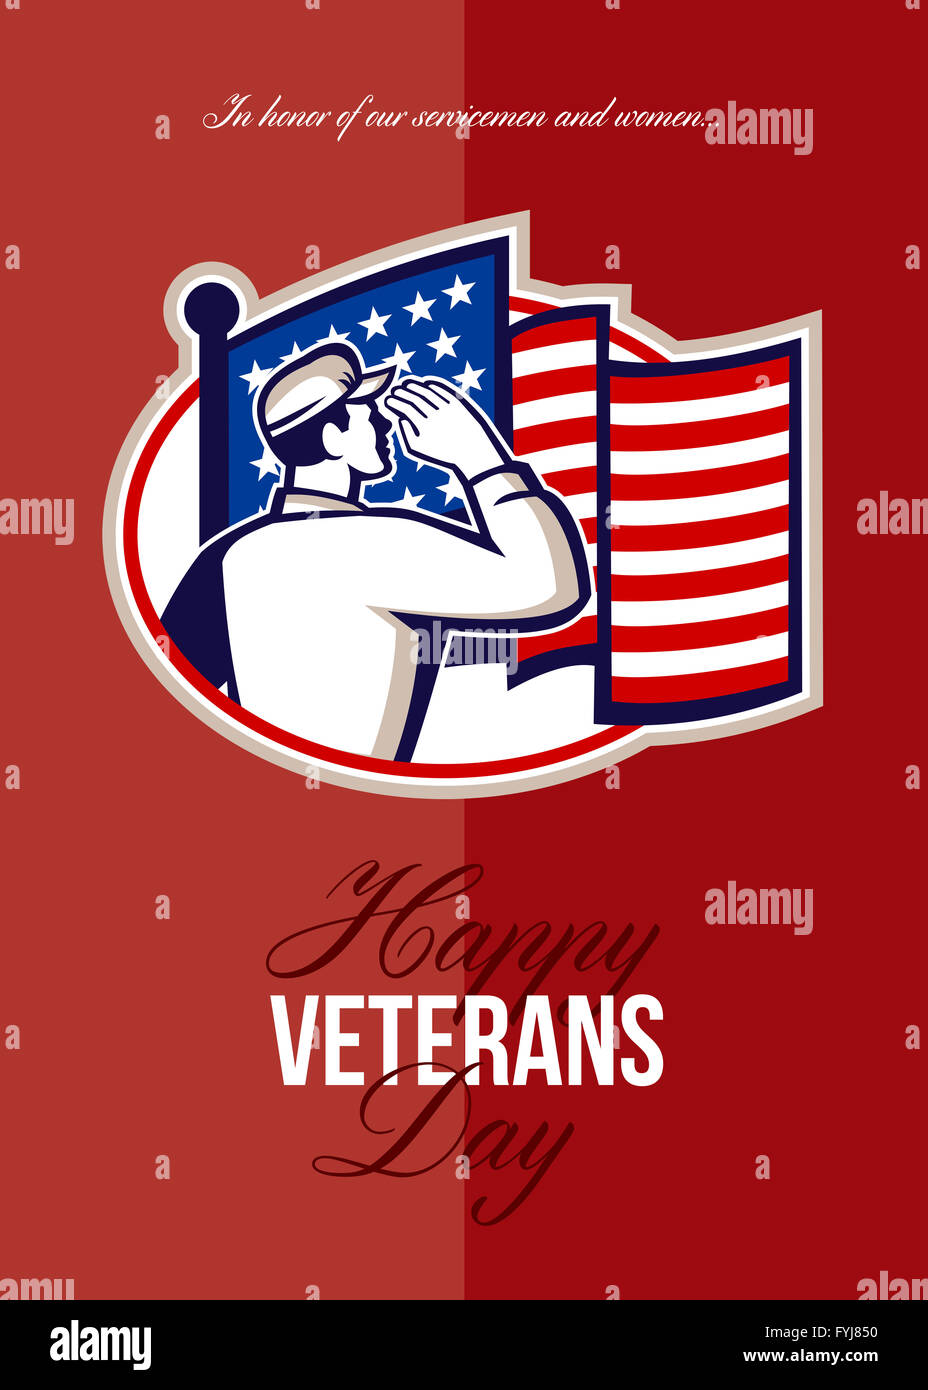 Veterans Day Modern American Soldier Card Stock Photo